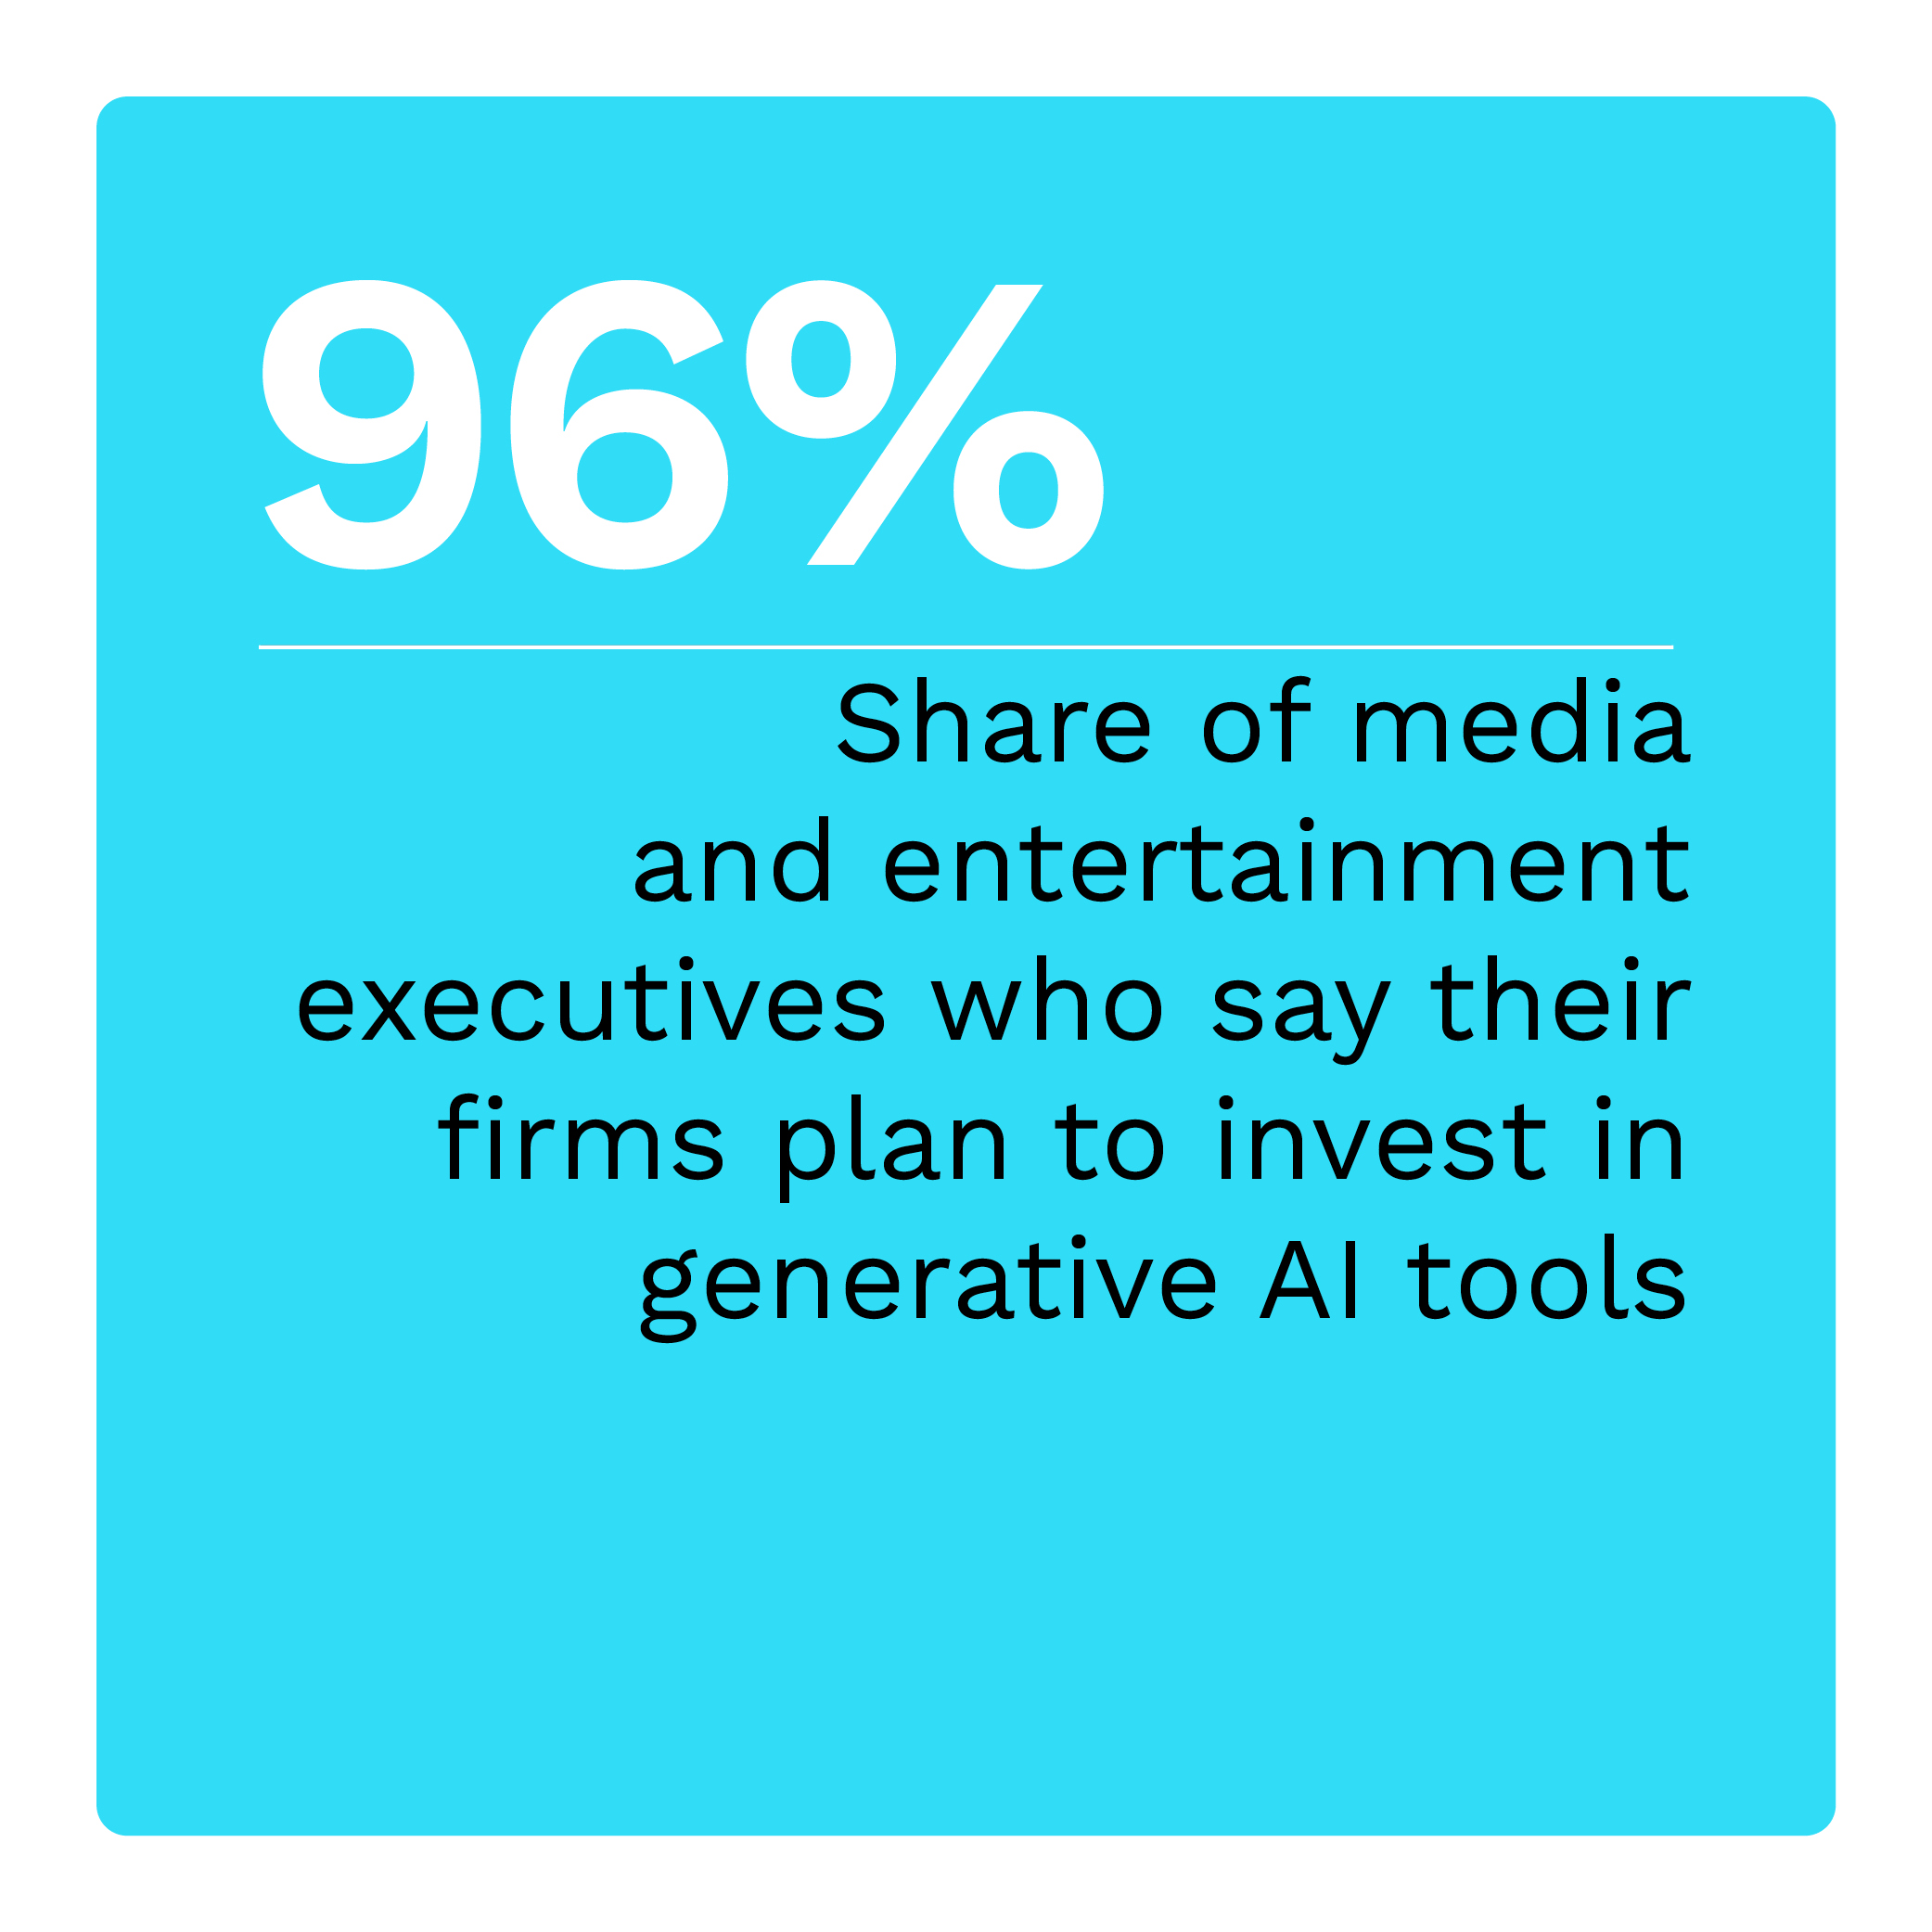  Share of media and entertainment executives who say their firms plan to invest in generative AI tools